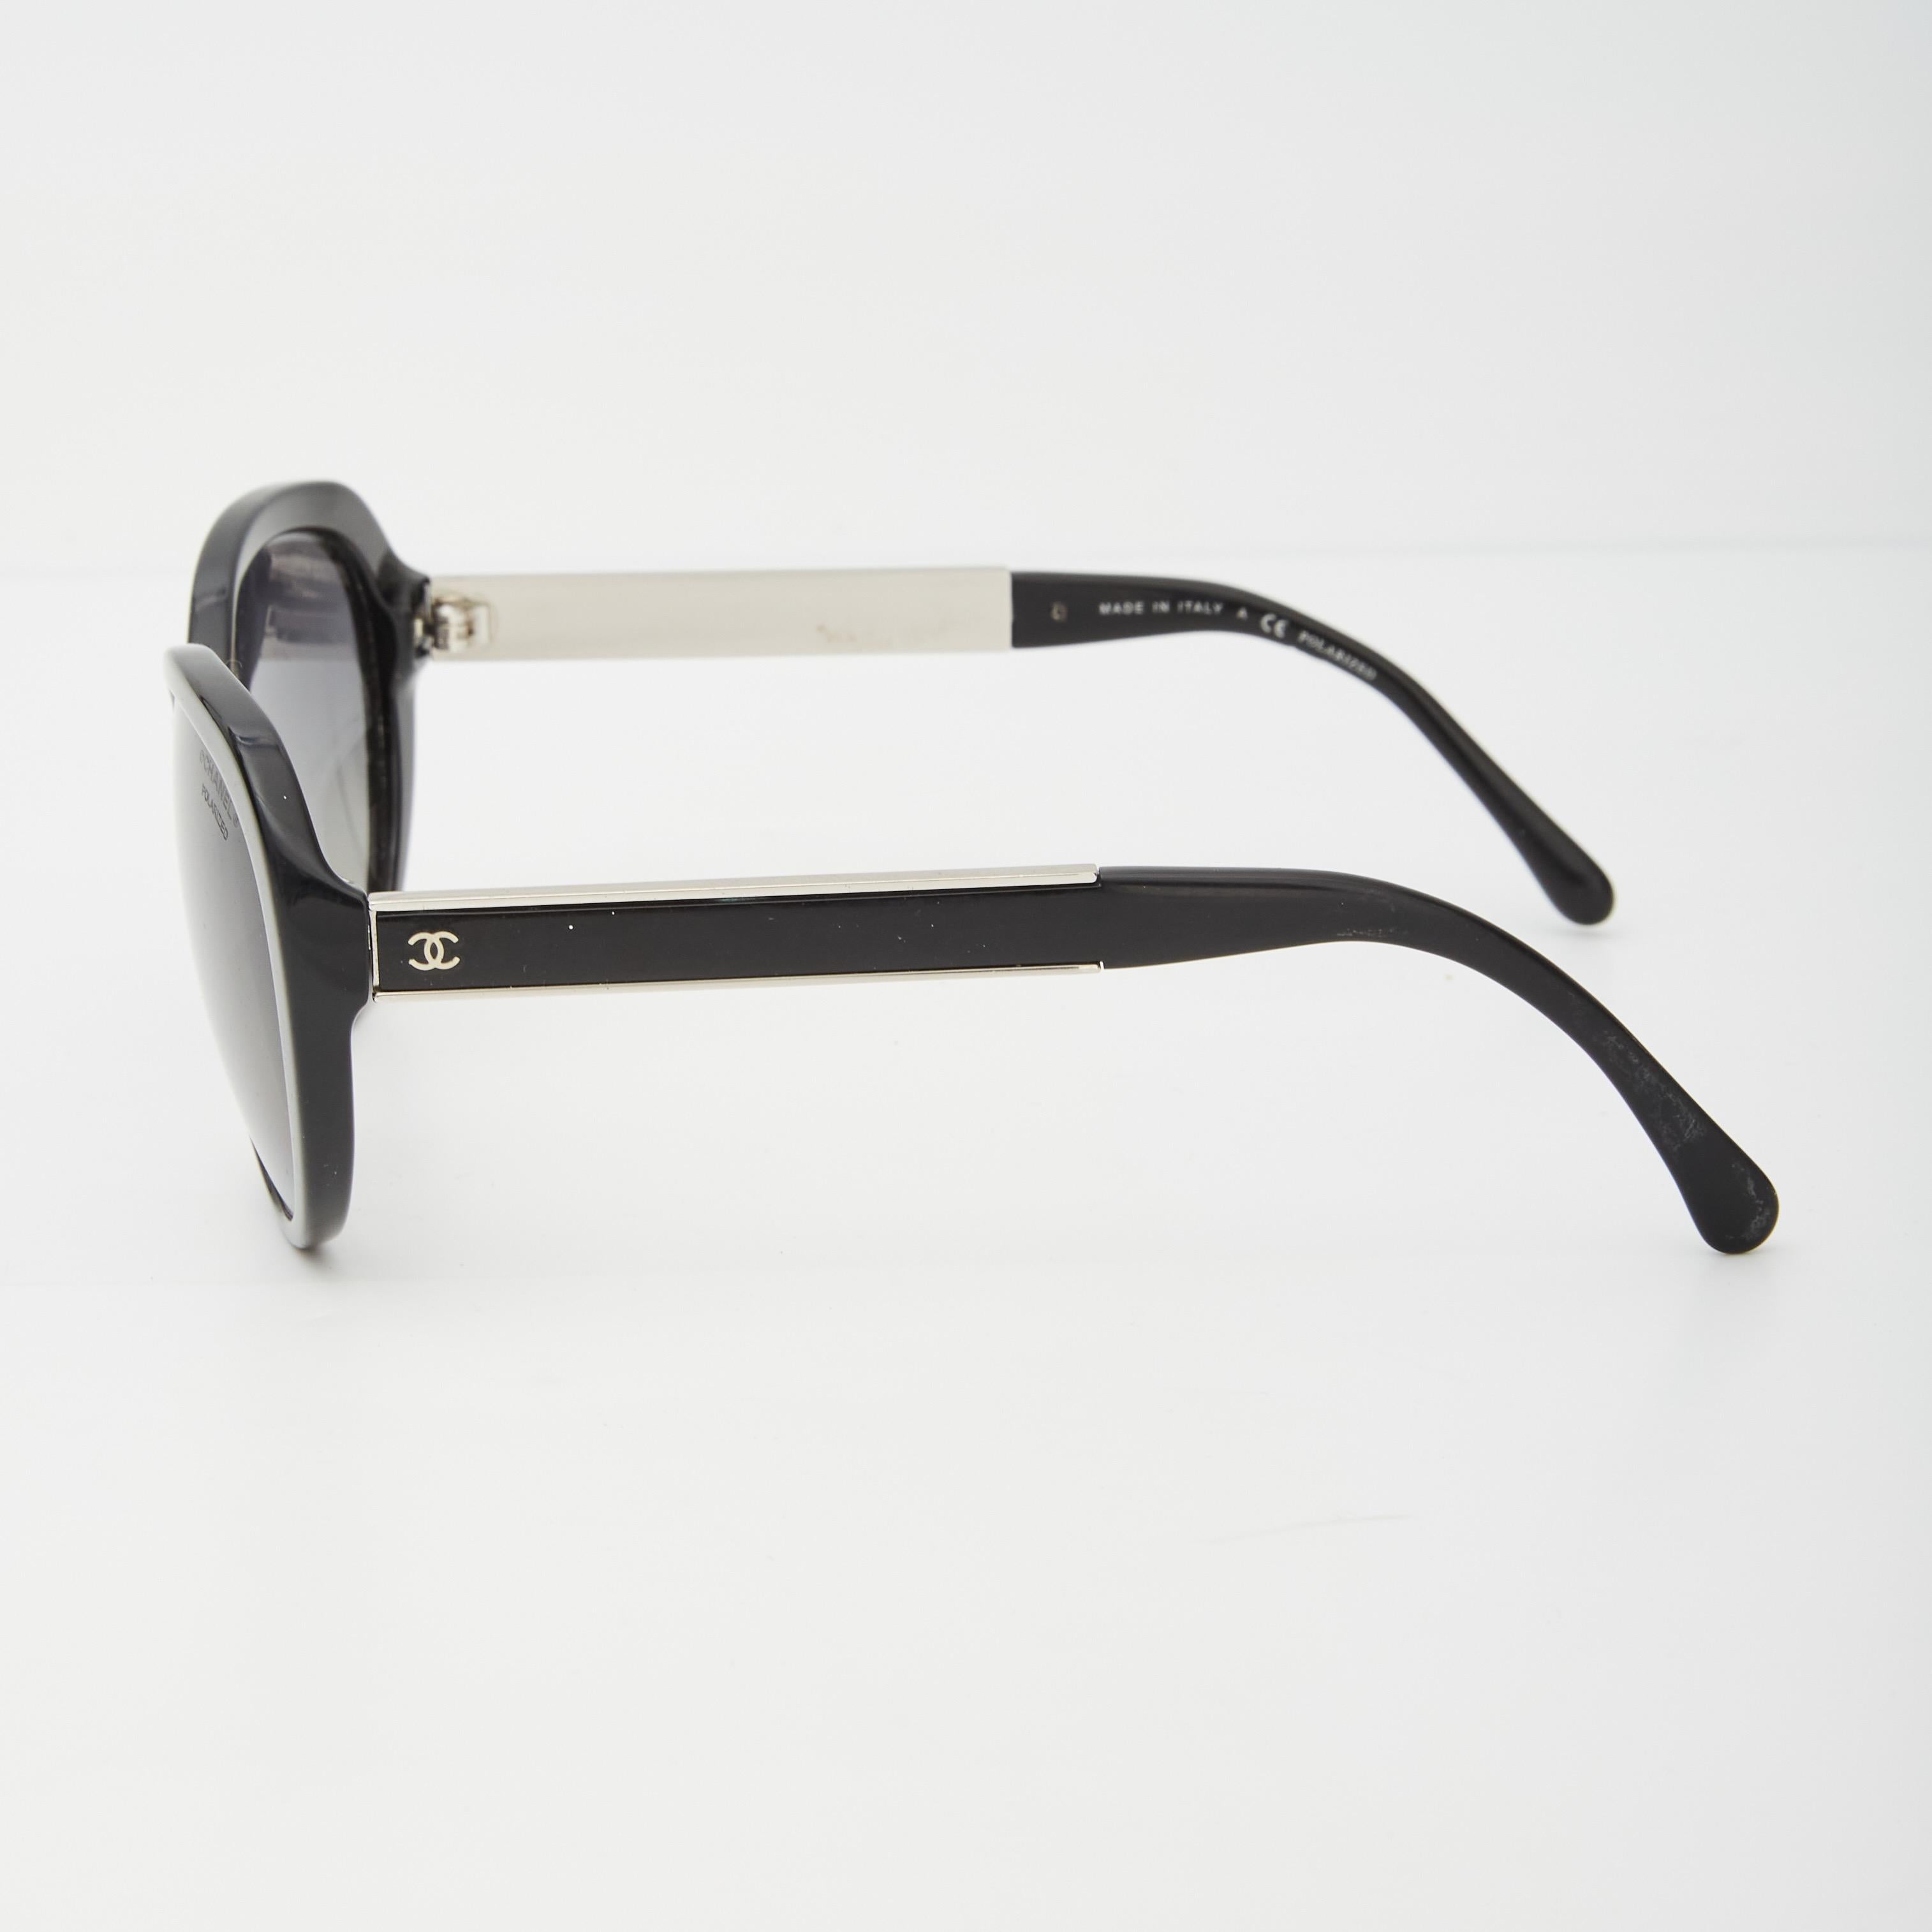 The Chanel sunglasses by Karl Lagerfeld are made of black Acetate and feature a car-eye shape, an interlocking CC logo on the side and tinted lenses.

COLOR: Black
CODE: 5269 c.501/S8
SIZE STAMP: 56 ☐ 17  135
FRAME MATERIAL: Acetate

MEASURES~
Arms: